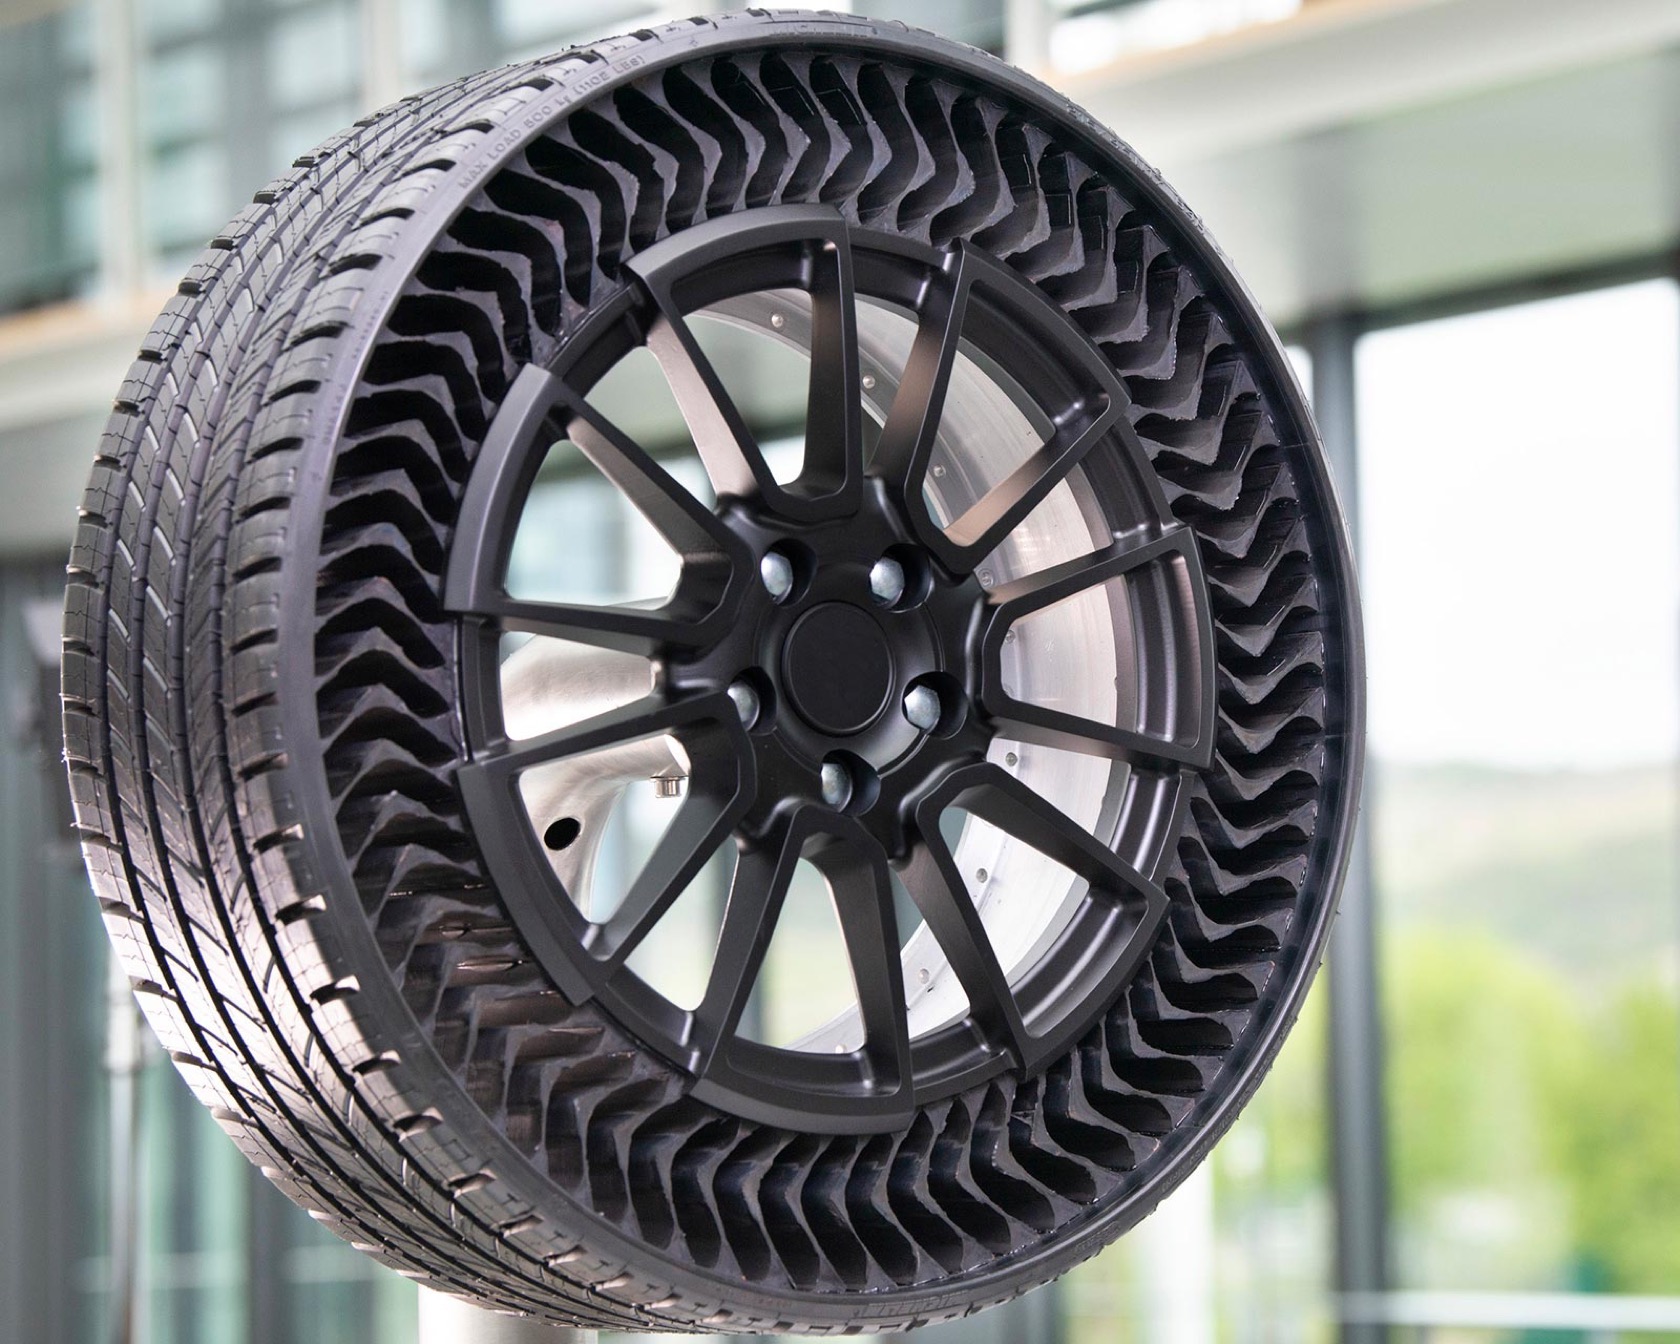 These airless tires could make GM cars punctureproof from 2024 SlashGear